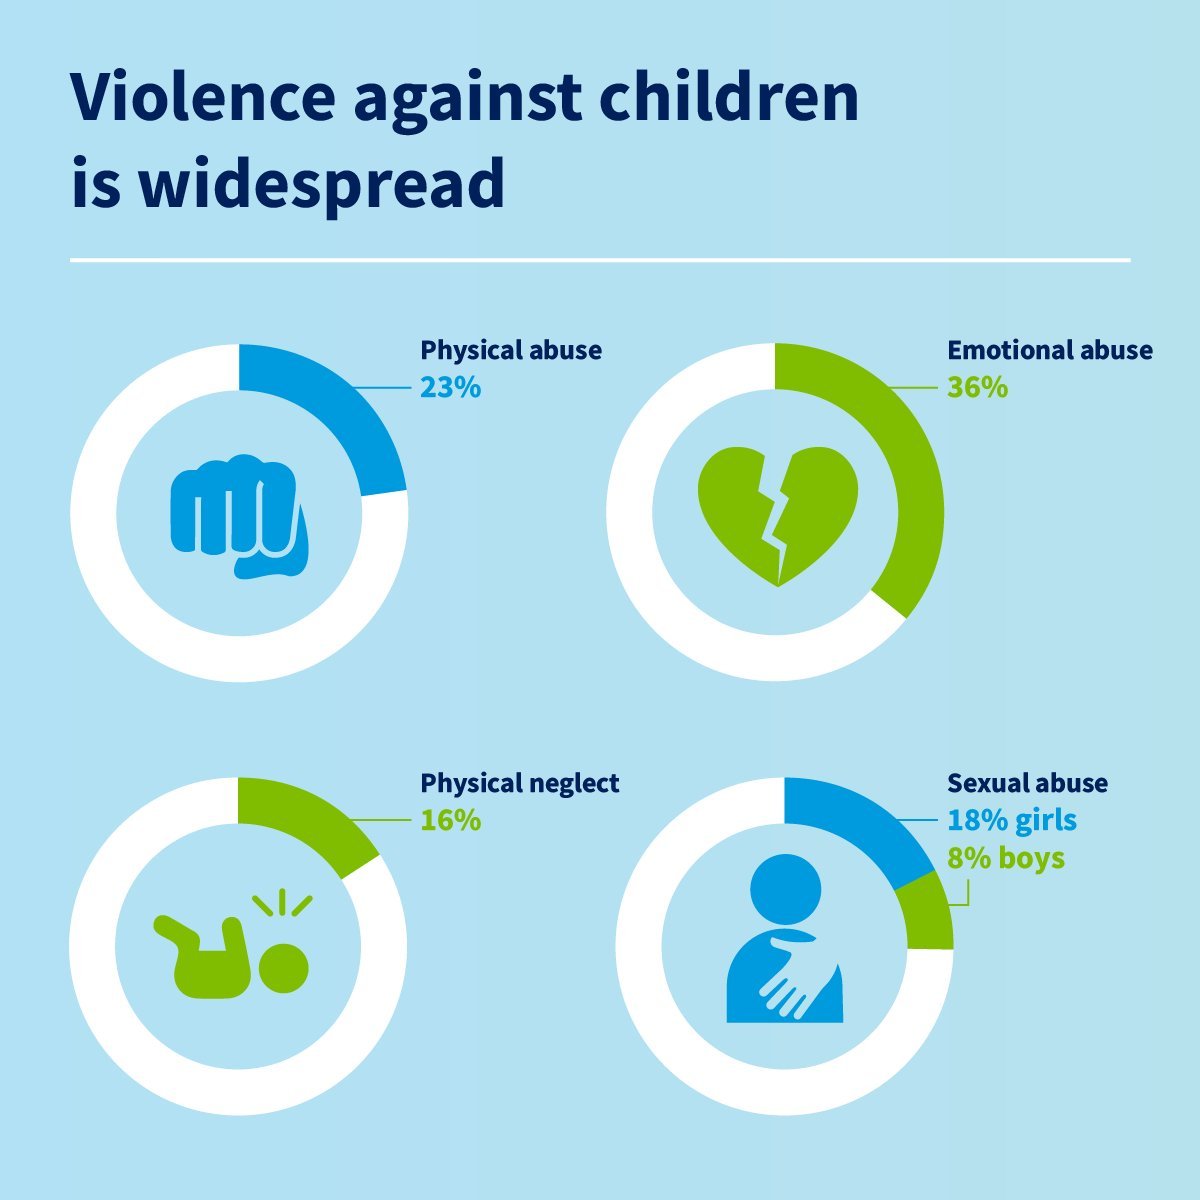 Violence against children is a prevalent #HumanRights violation that affects the health, well-being, and life opportunities of children everywhere.

Child maltreatment is widespread, but often hidden.
bit.ly/3M6gPGM

#EndViolence